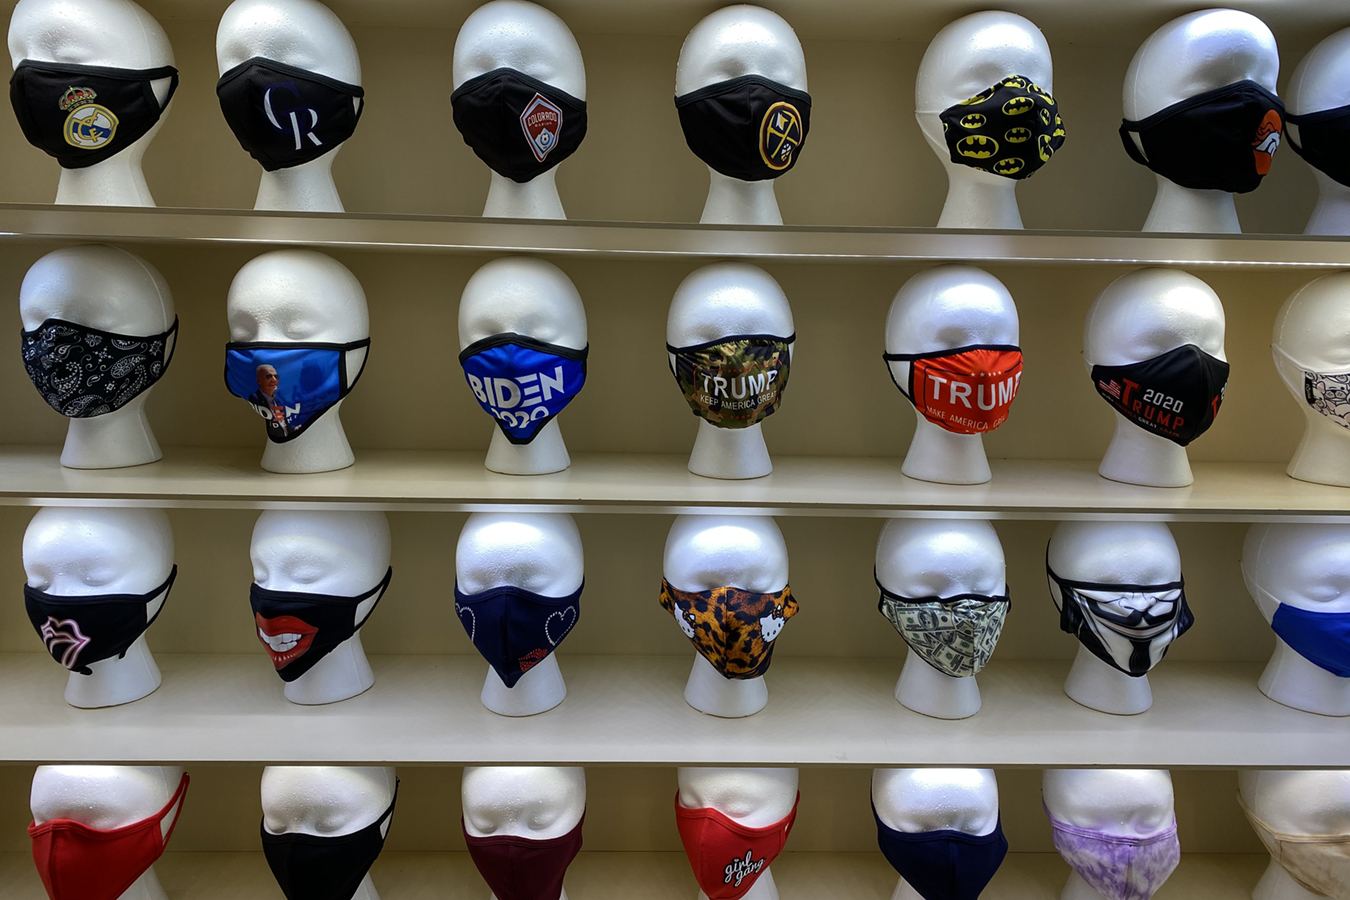 Making Money Off Masks, COVID-Spawned Chain Store Aims to Become Obsolete -  KFF Health News